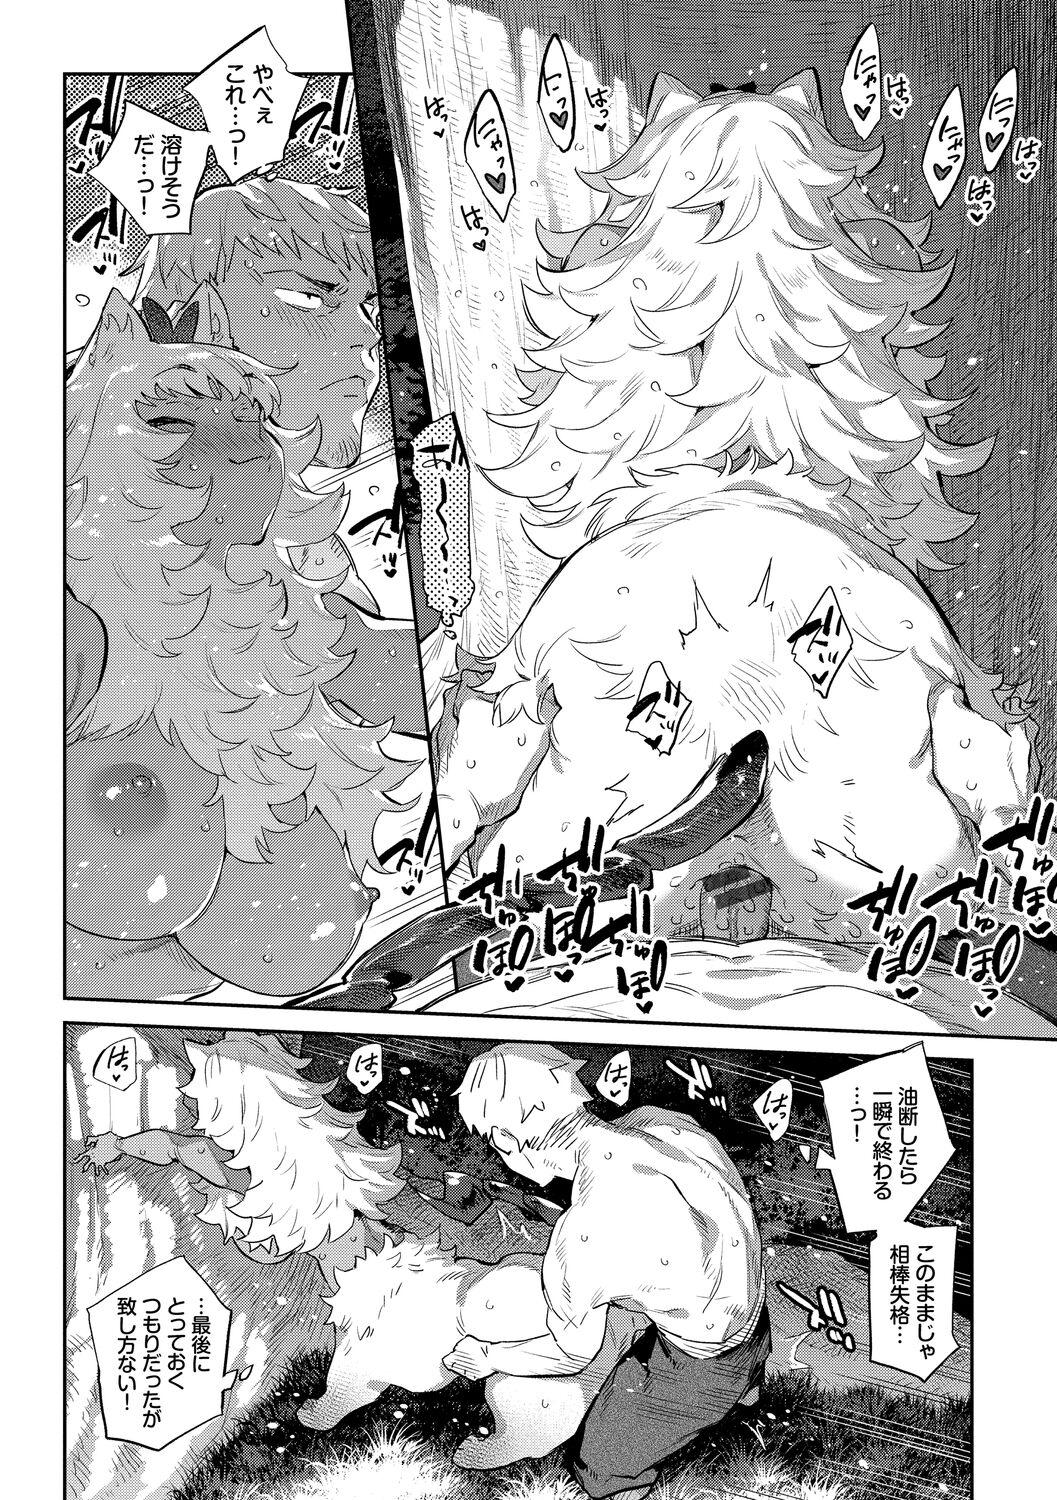 Ihou no Otome - Monster Girls in Another World 51